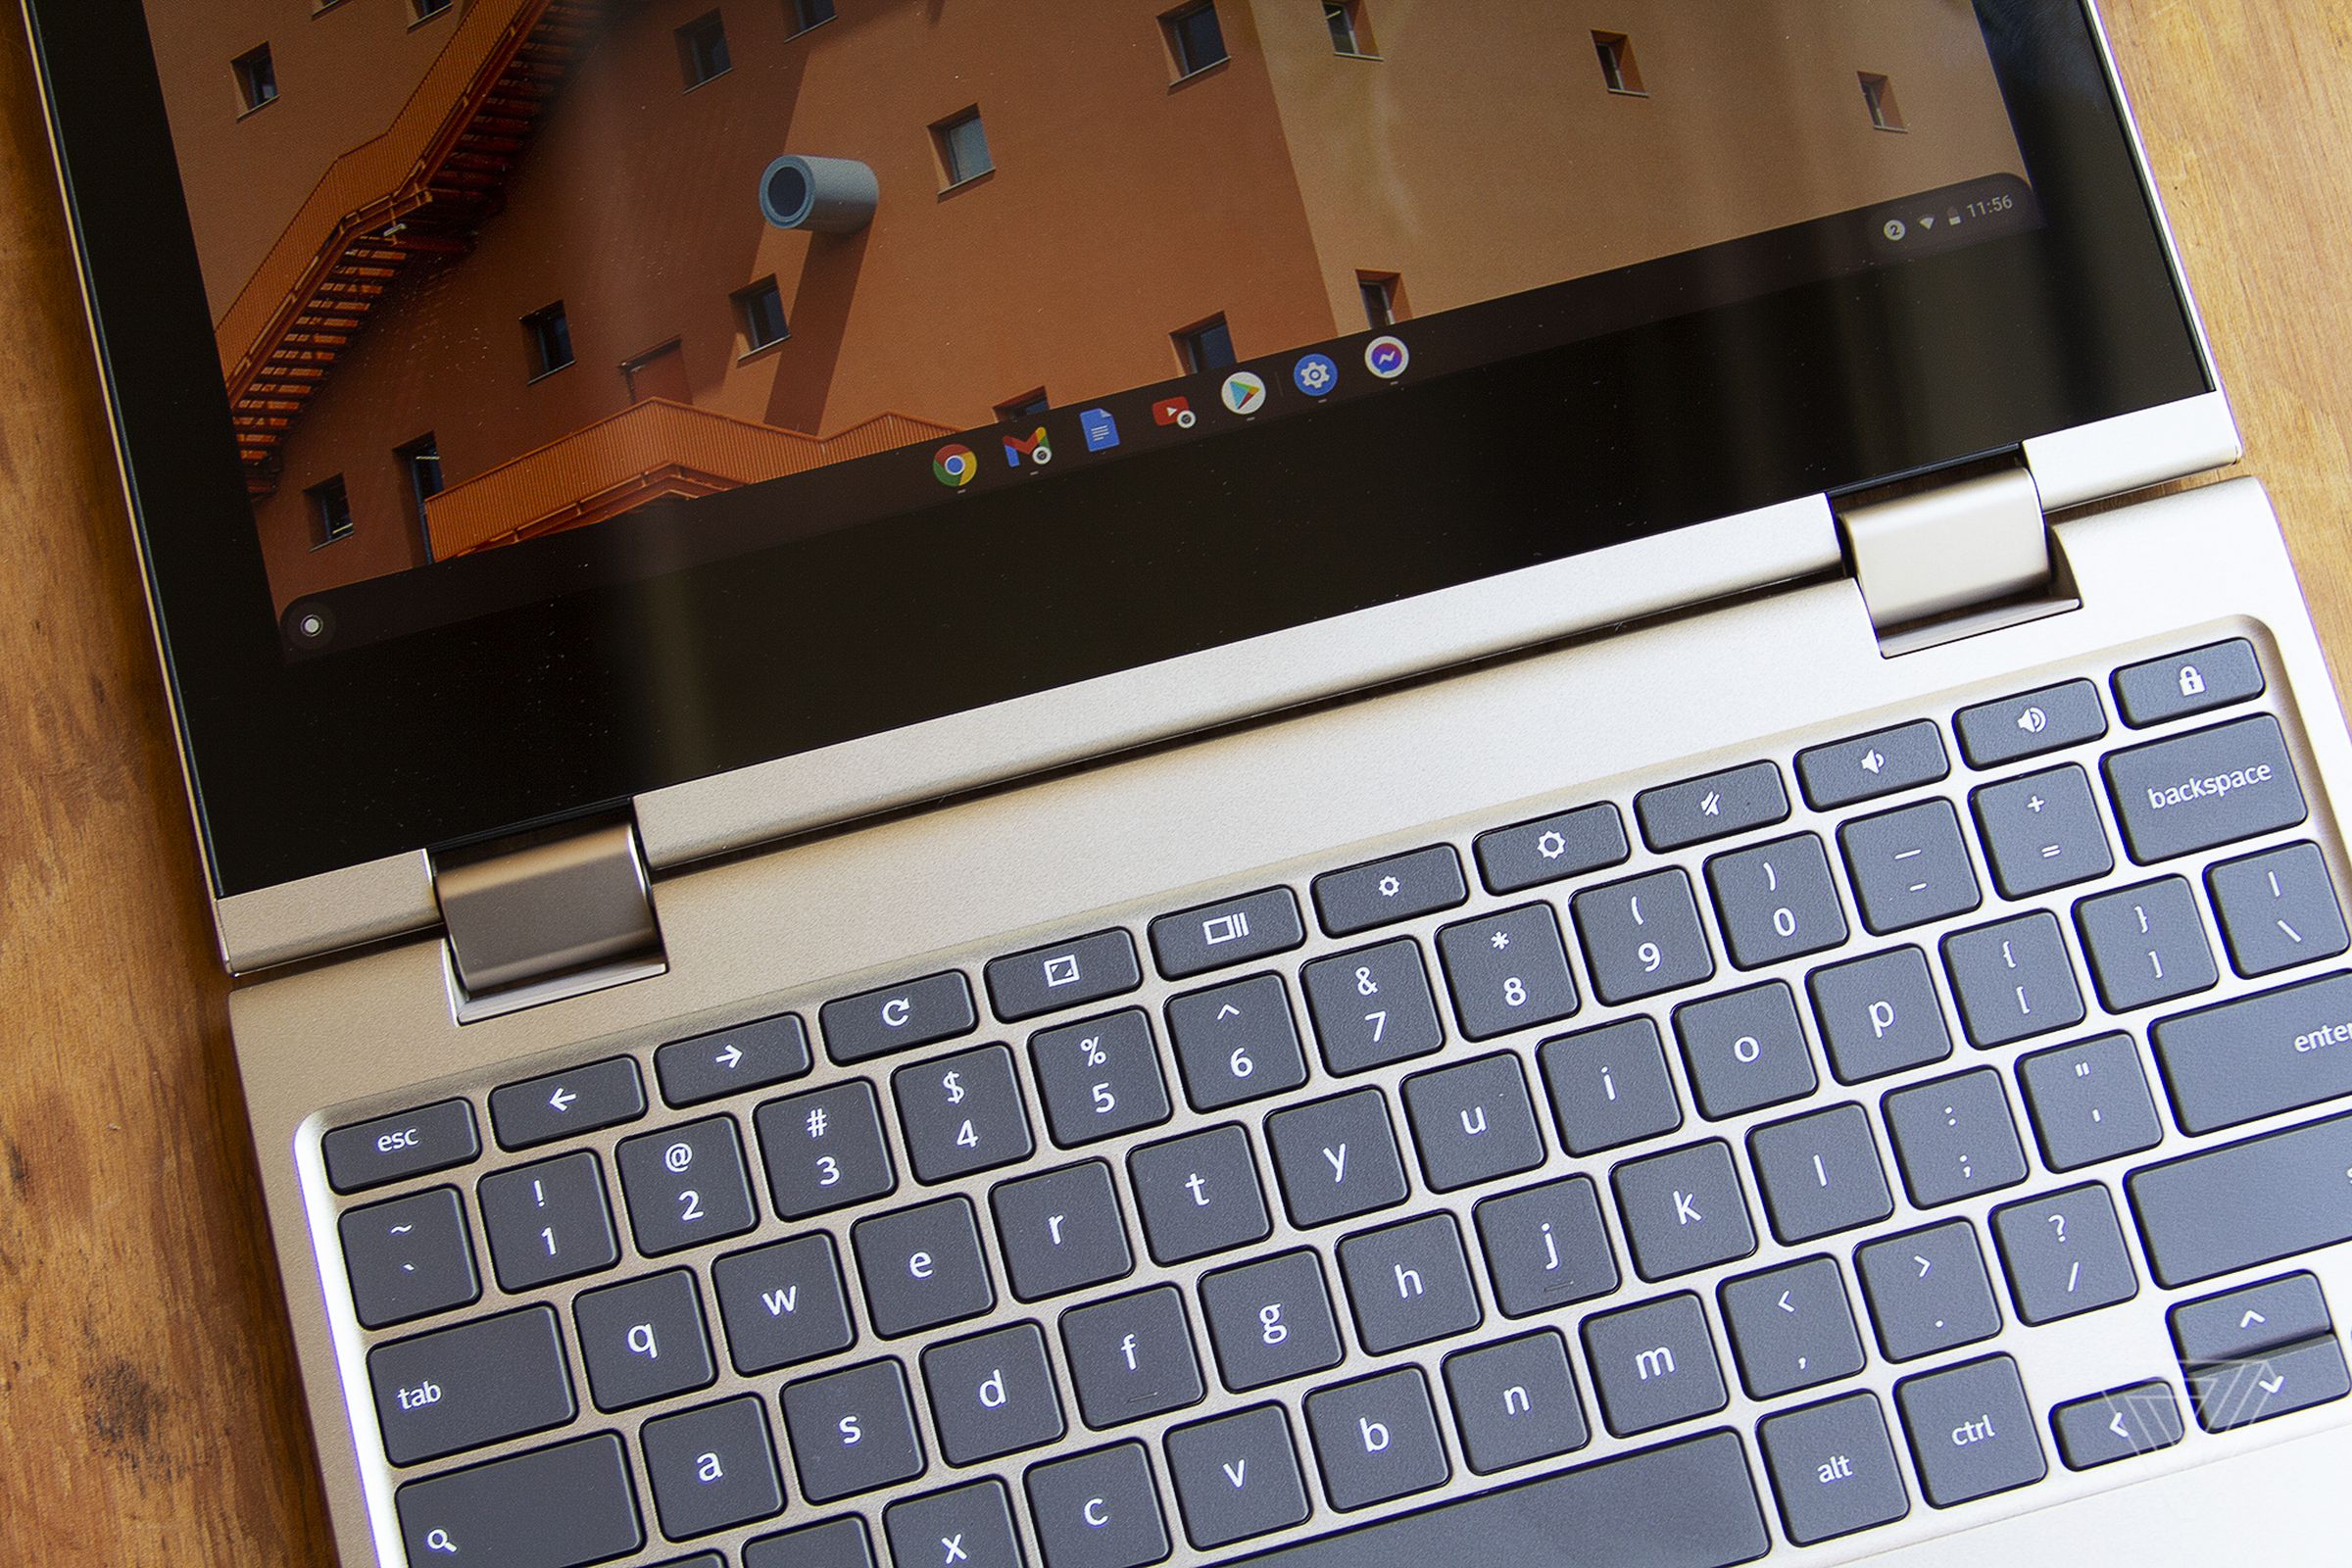 The Lenovo Ideapad Flex 3 Chromebook laid flat on a wooden table, seen from above, angled slightly to the left.